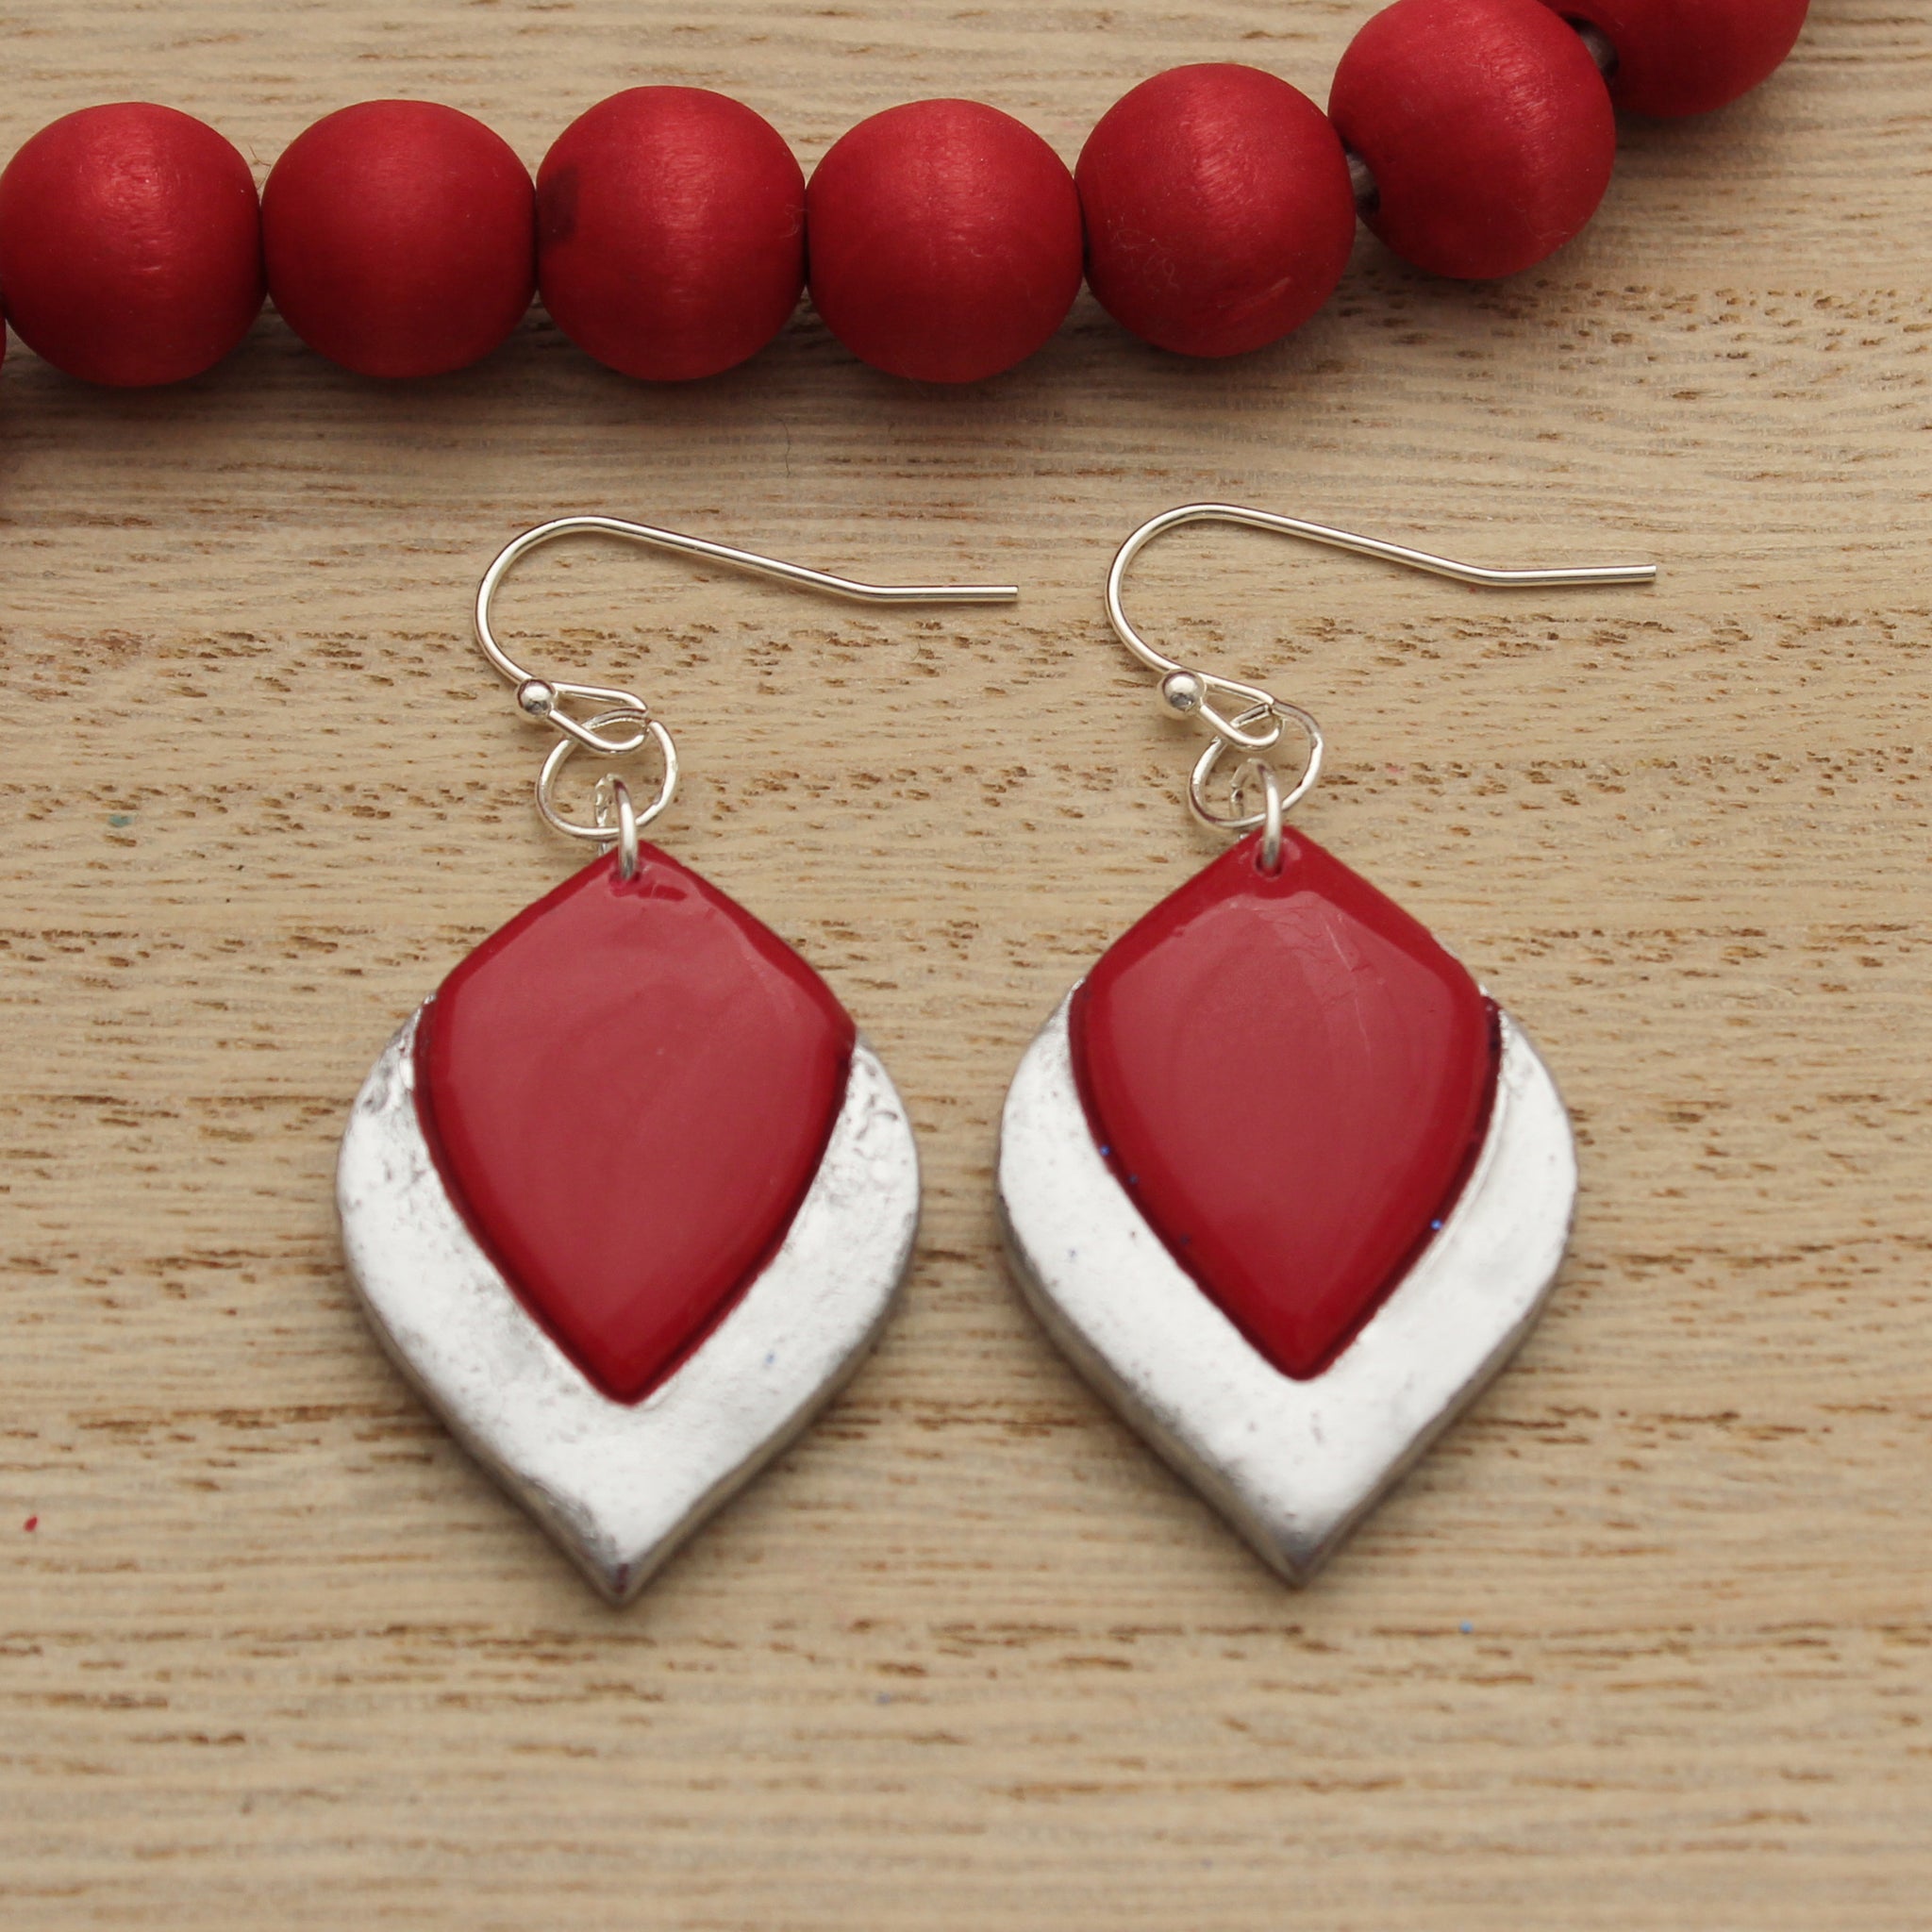 Cherry Pie and Silver Harper Dangle Polymer Clay Earrings